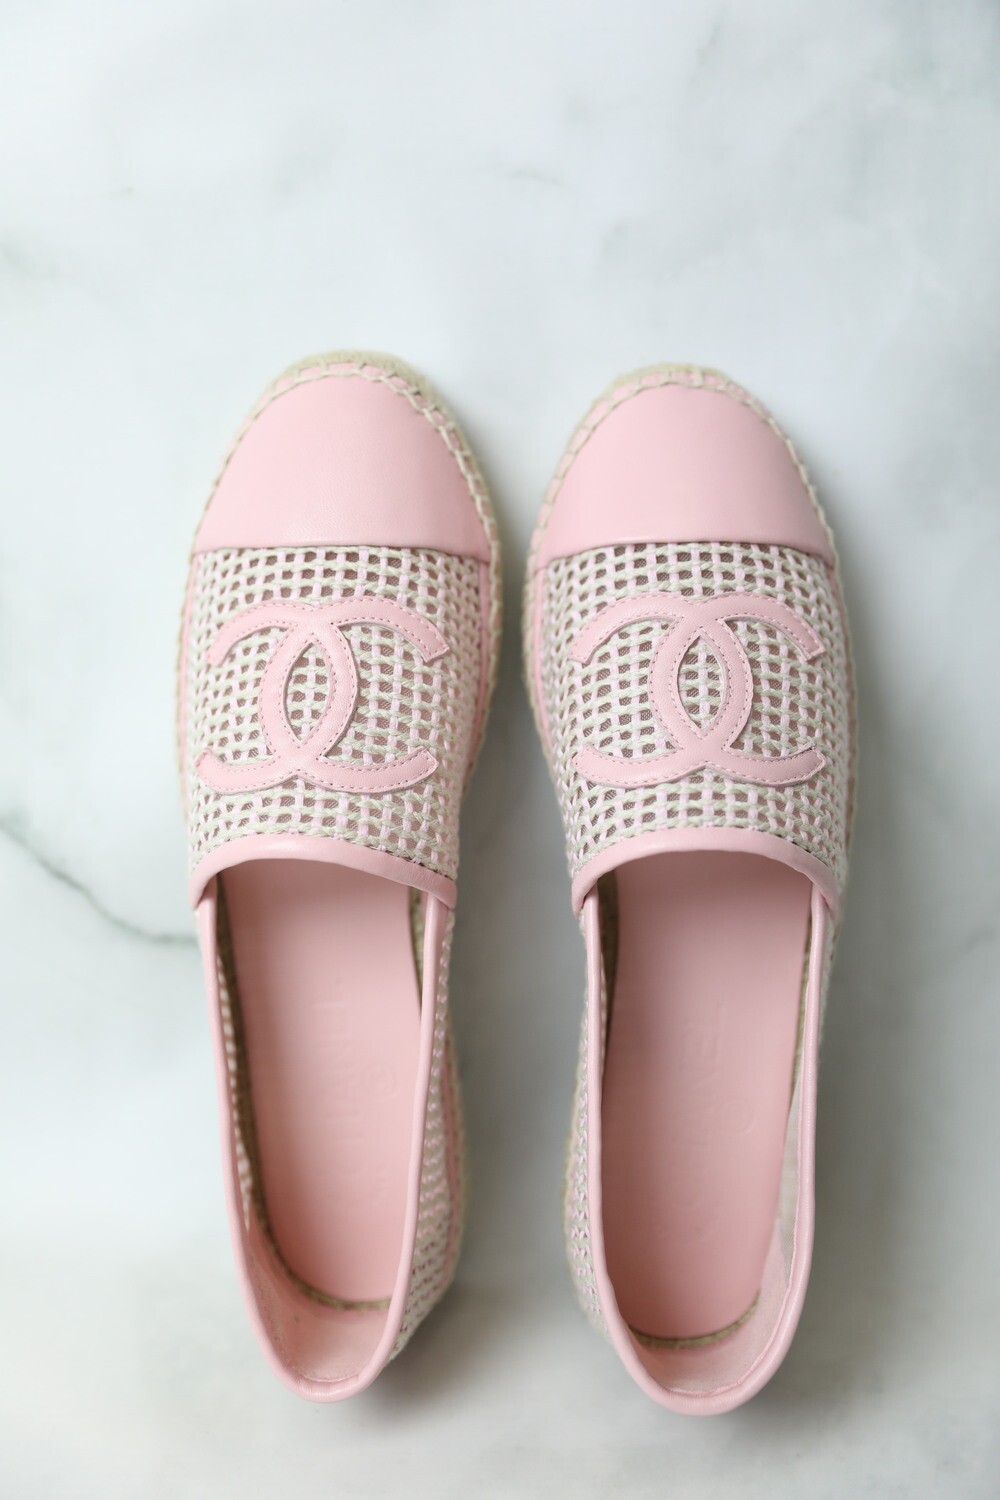 Chanel Shoes Espadrilles, Pink and White, Size 40, New in Box WA001